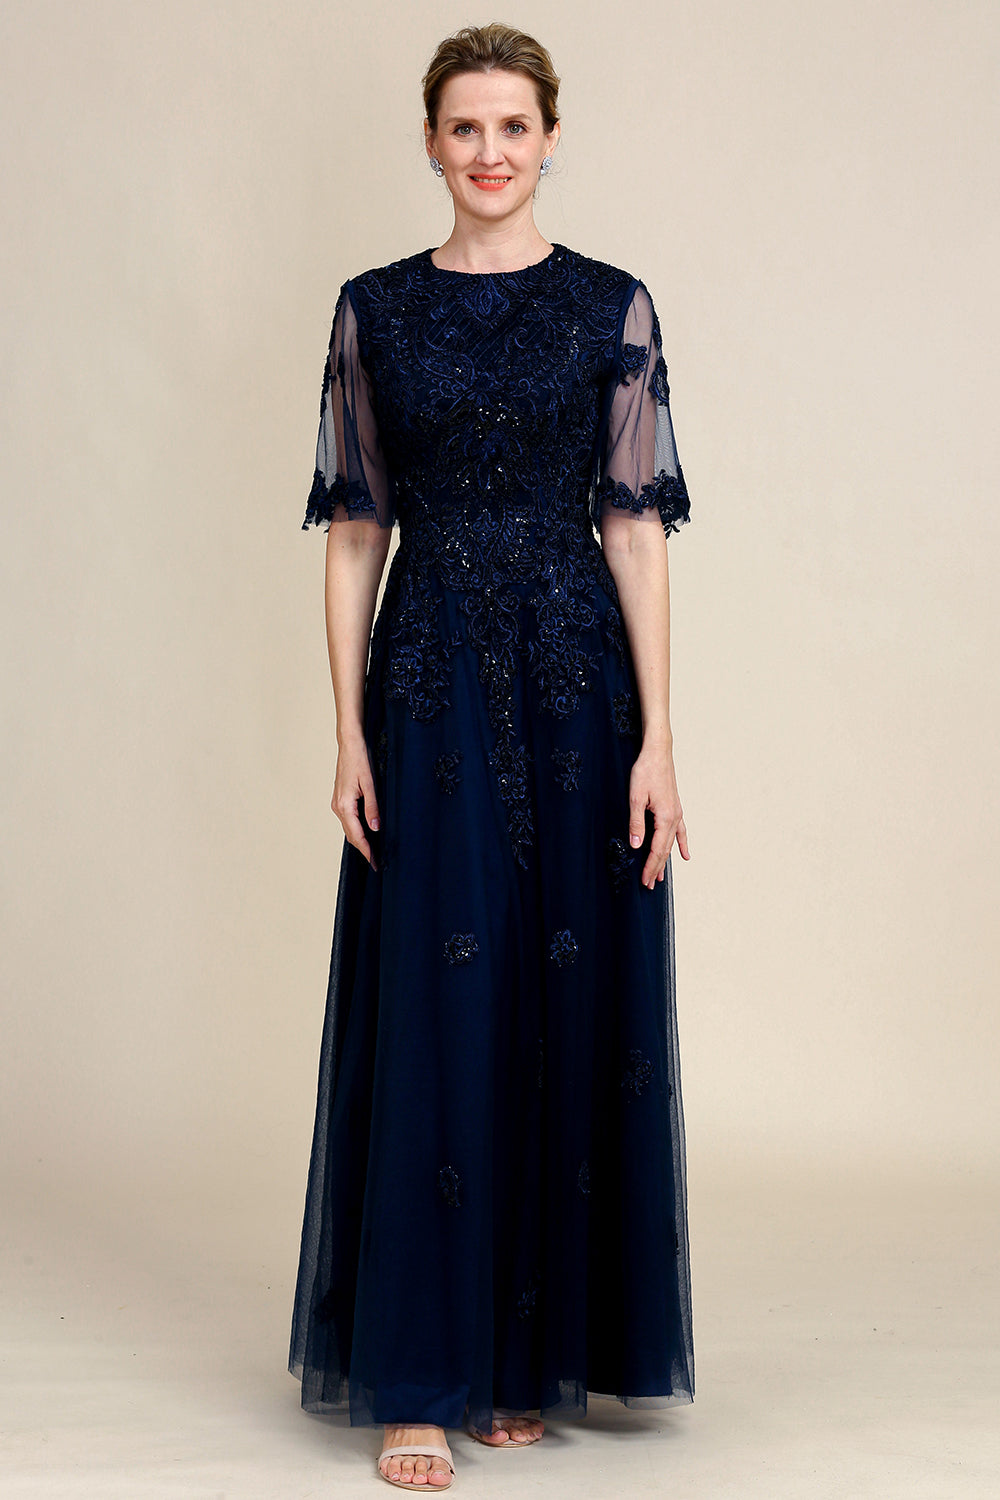 Navy A Line Beading Sparkly Mother Of Bride Dress with Appliques